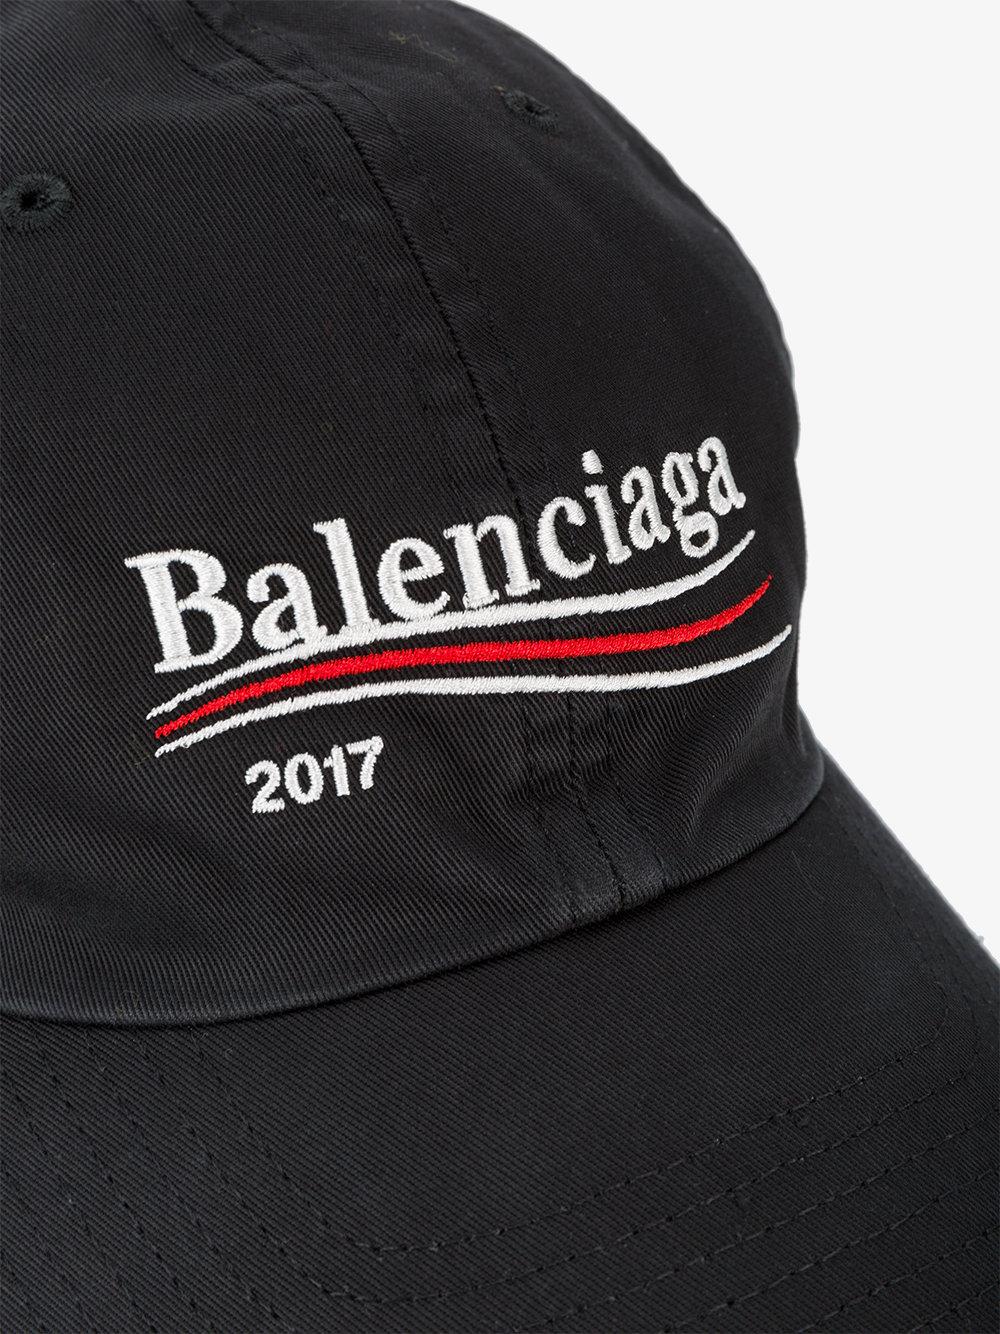 Balenciaga Cotton Campaign Logo Embroidered Hat in Black for Men - Lyst